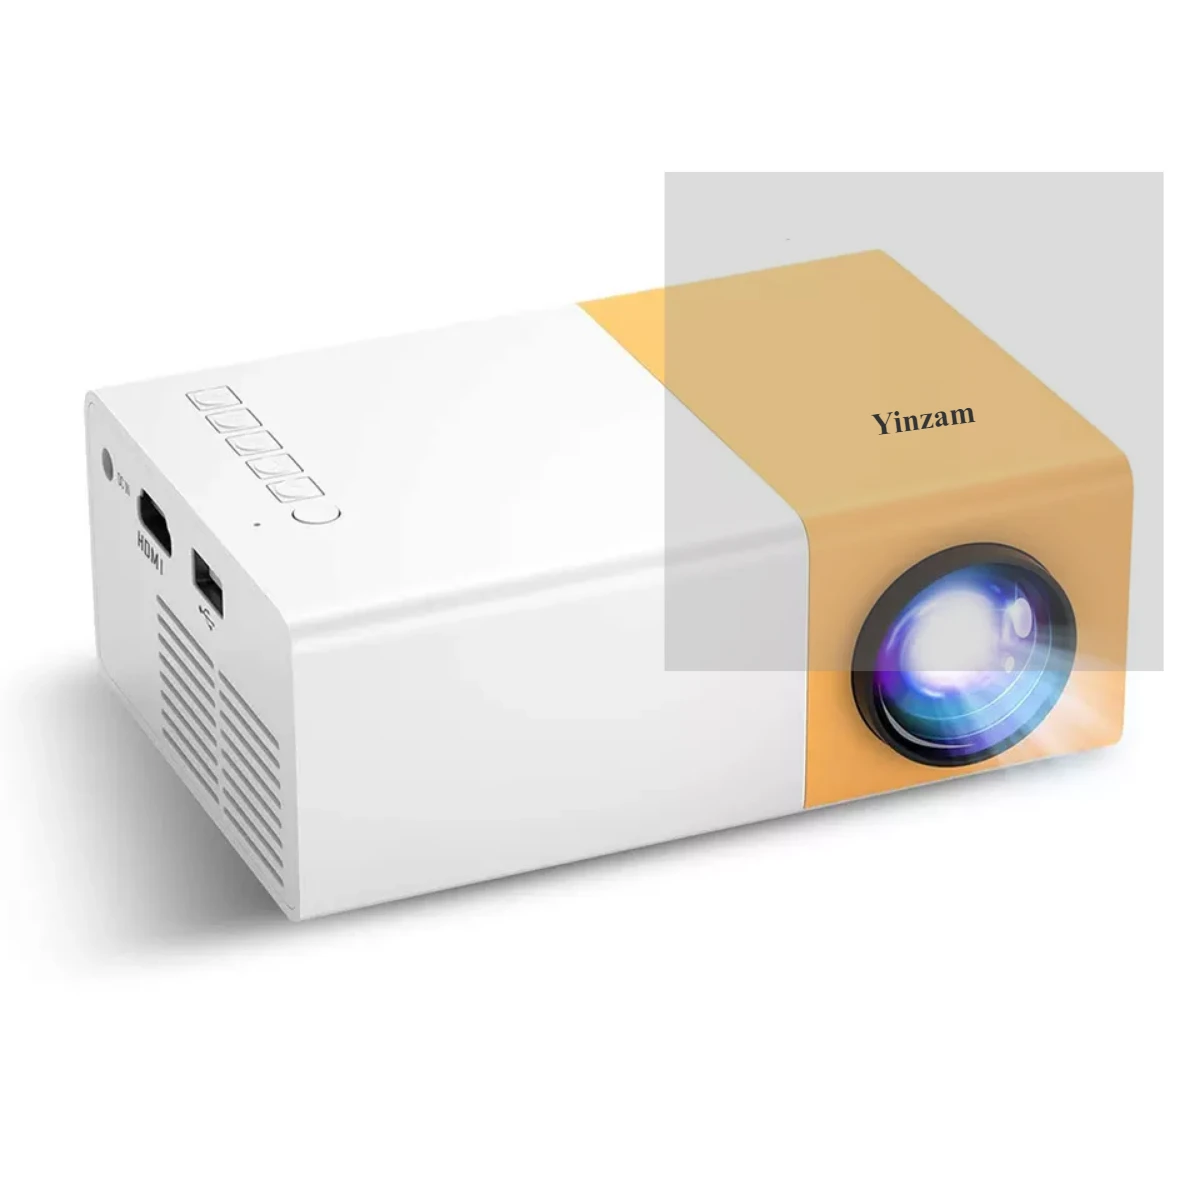 Yinzam Portable YG300 Cheap Mini Projector For Home Kids Smart Pocket Cinema Video Proyector YG-300 1000Lumens with 1080p Beamer